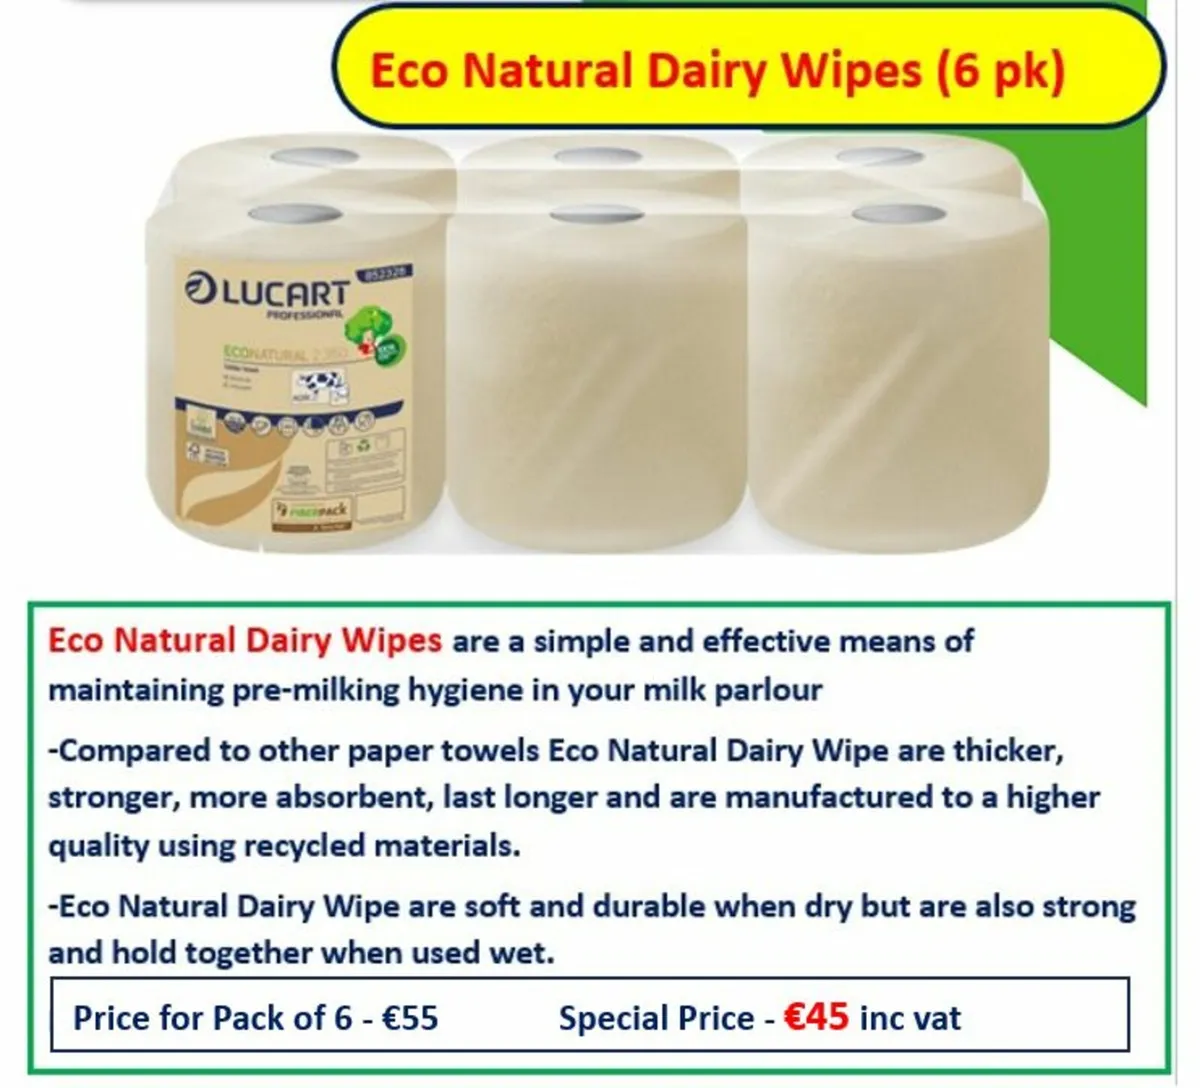 Eco Dairy Wipes for sale at FDS - special offer